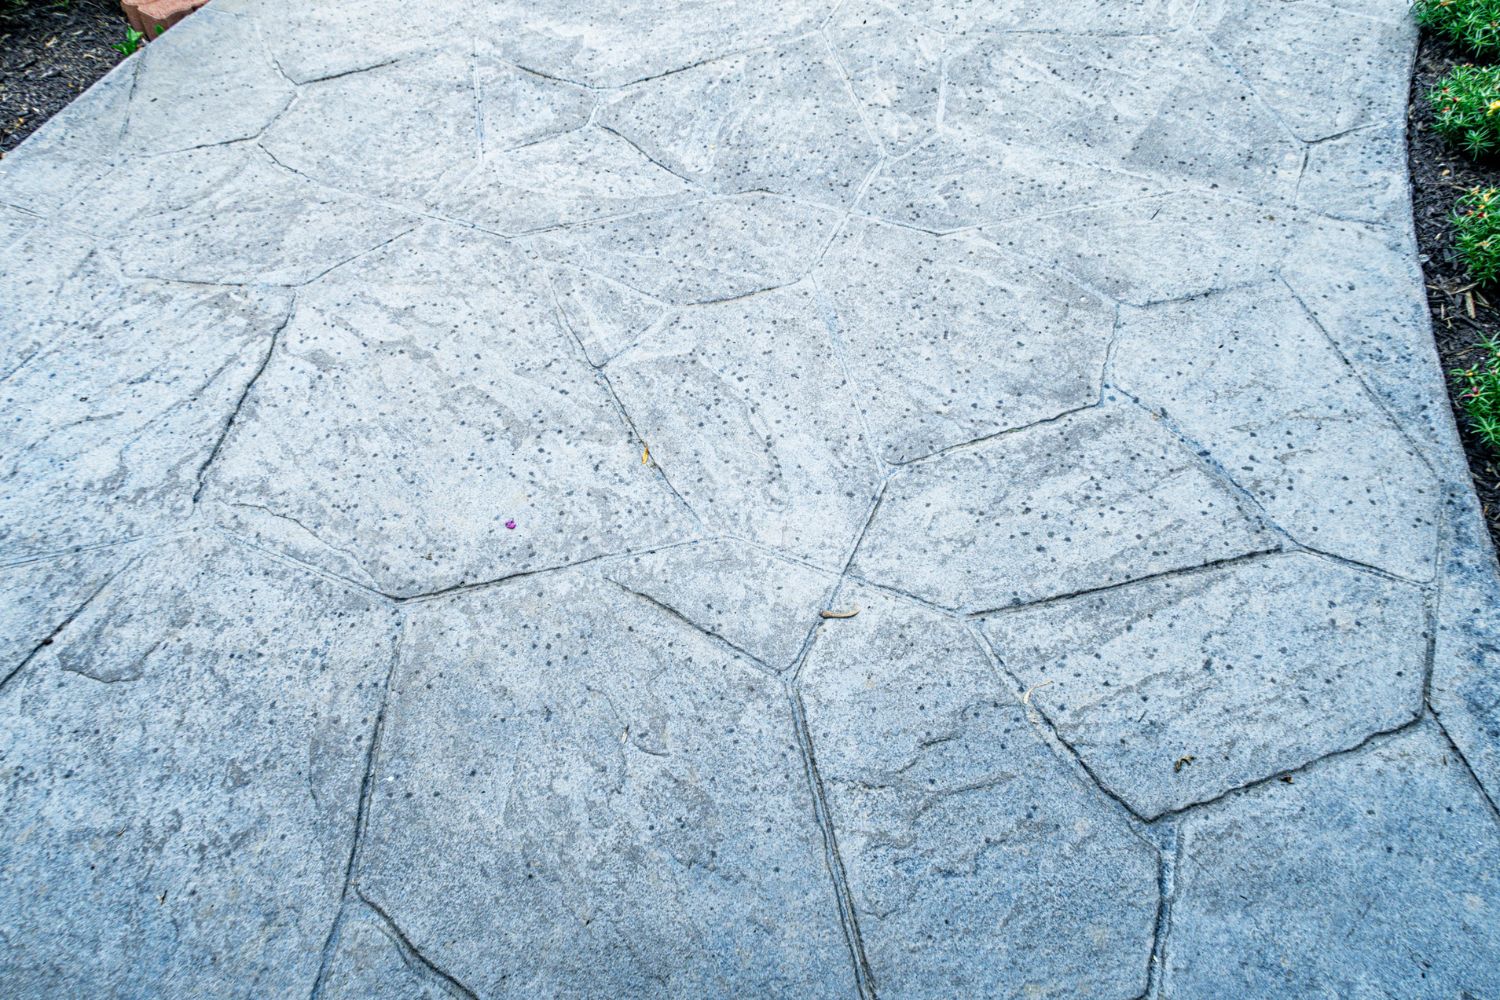 A close-up of a stamped concrete walkway.